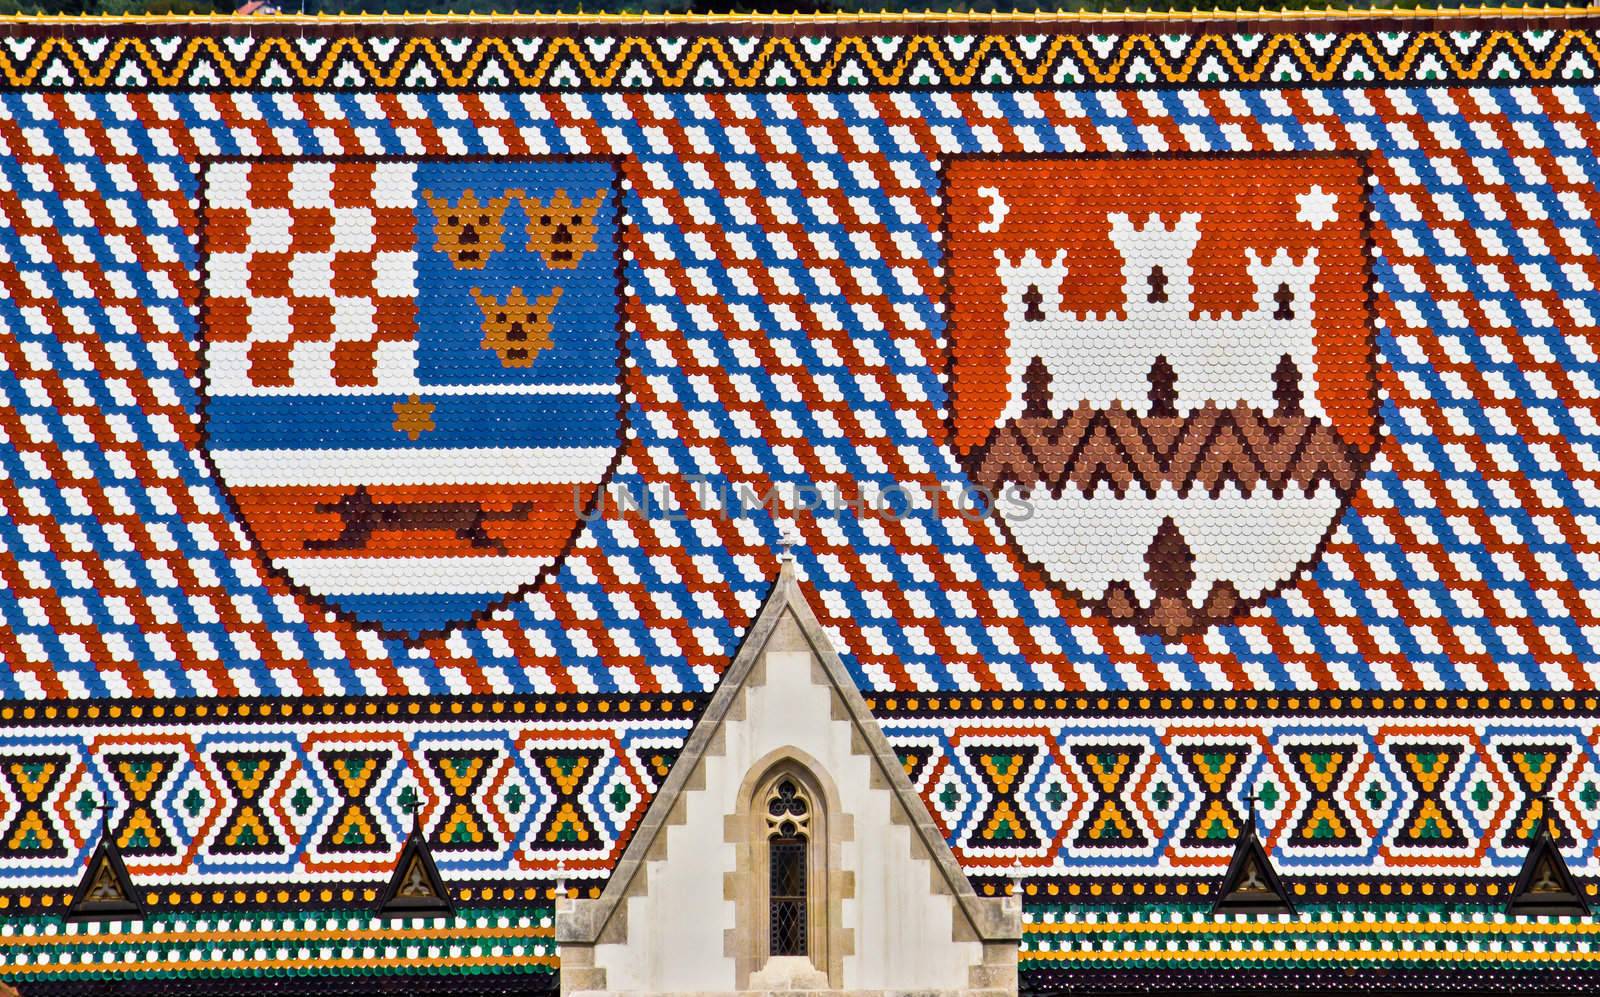 Saint Mark's church roof with Croatian coat of arms